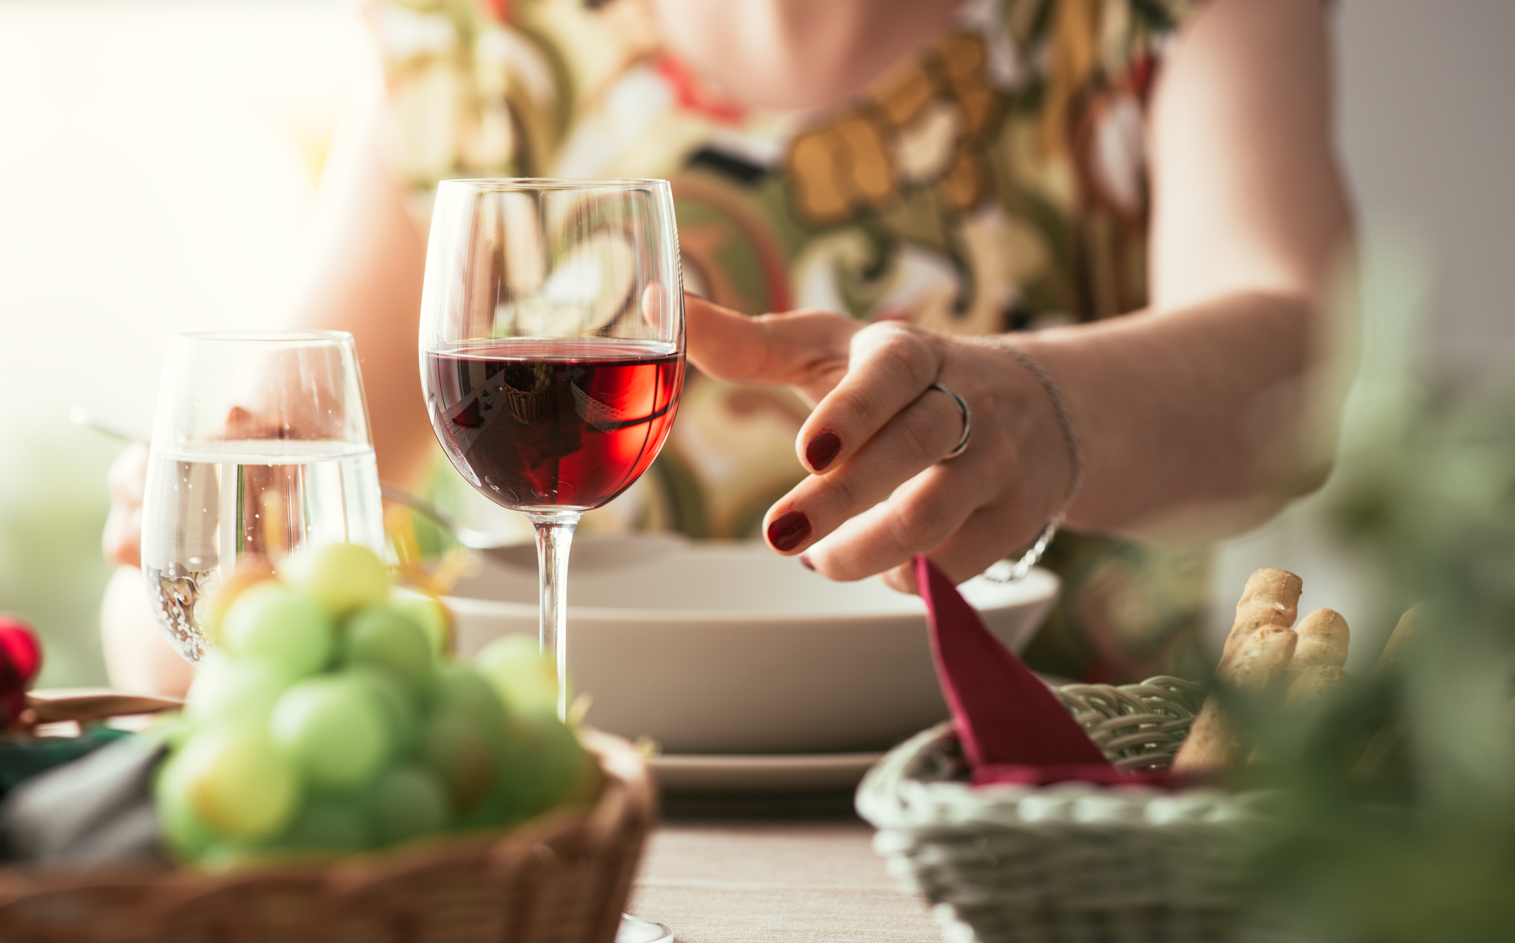 A woman reaches for a glass of wine on the dinner table. Concept of pregnant women avoiding foods like alcohol.